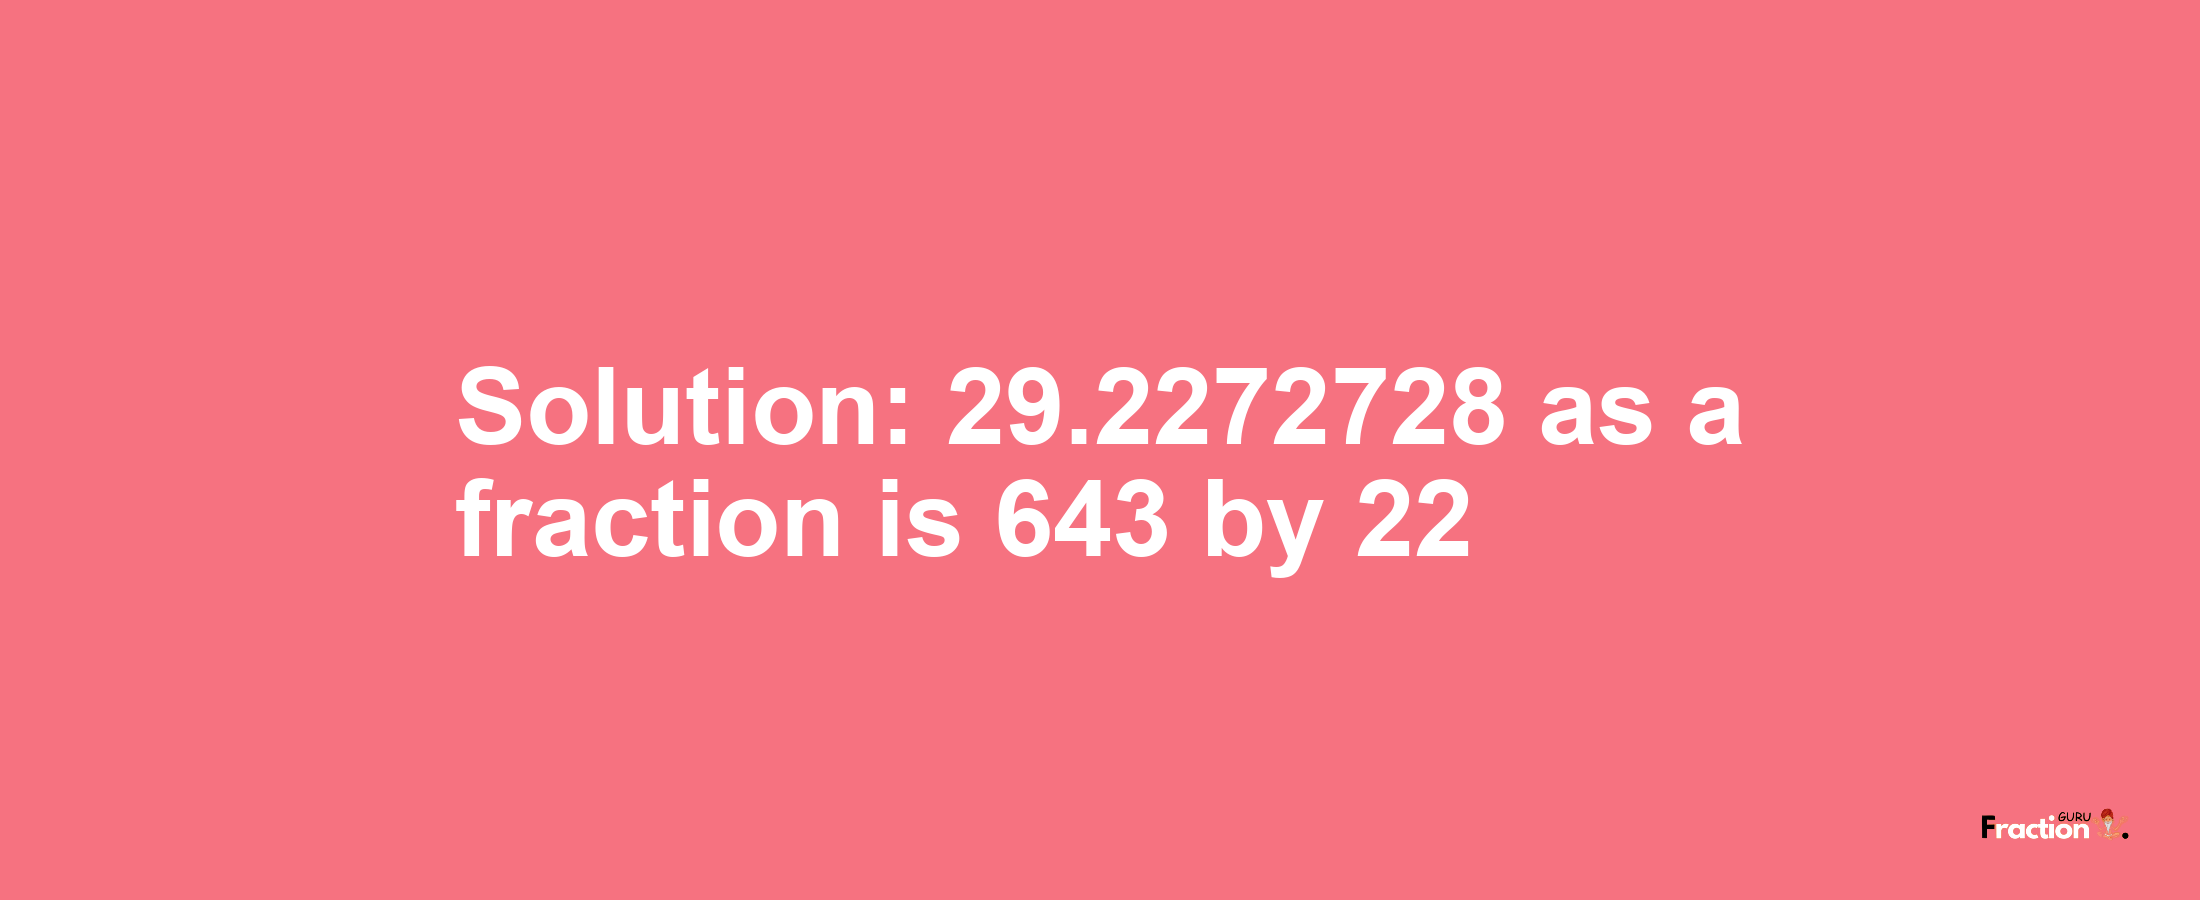 Solution:29.2272728 as a fraction is 643/22